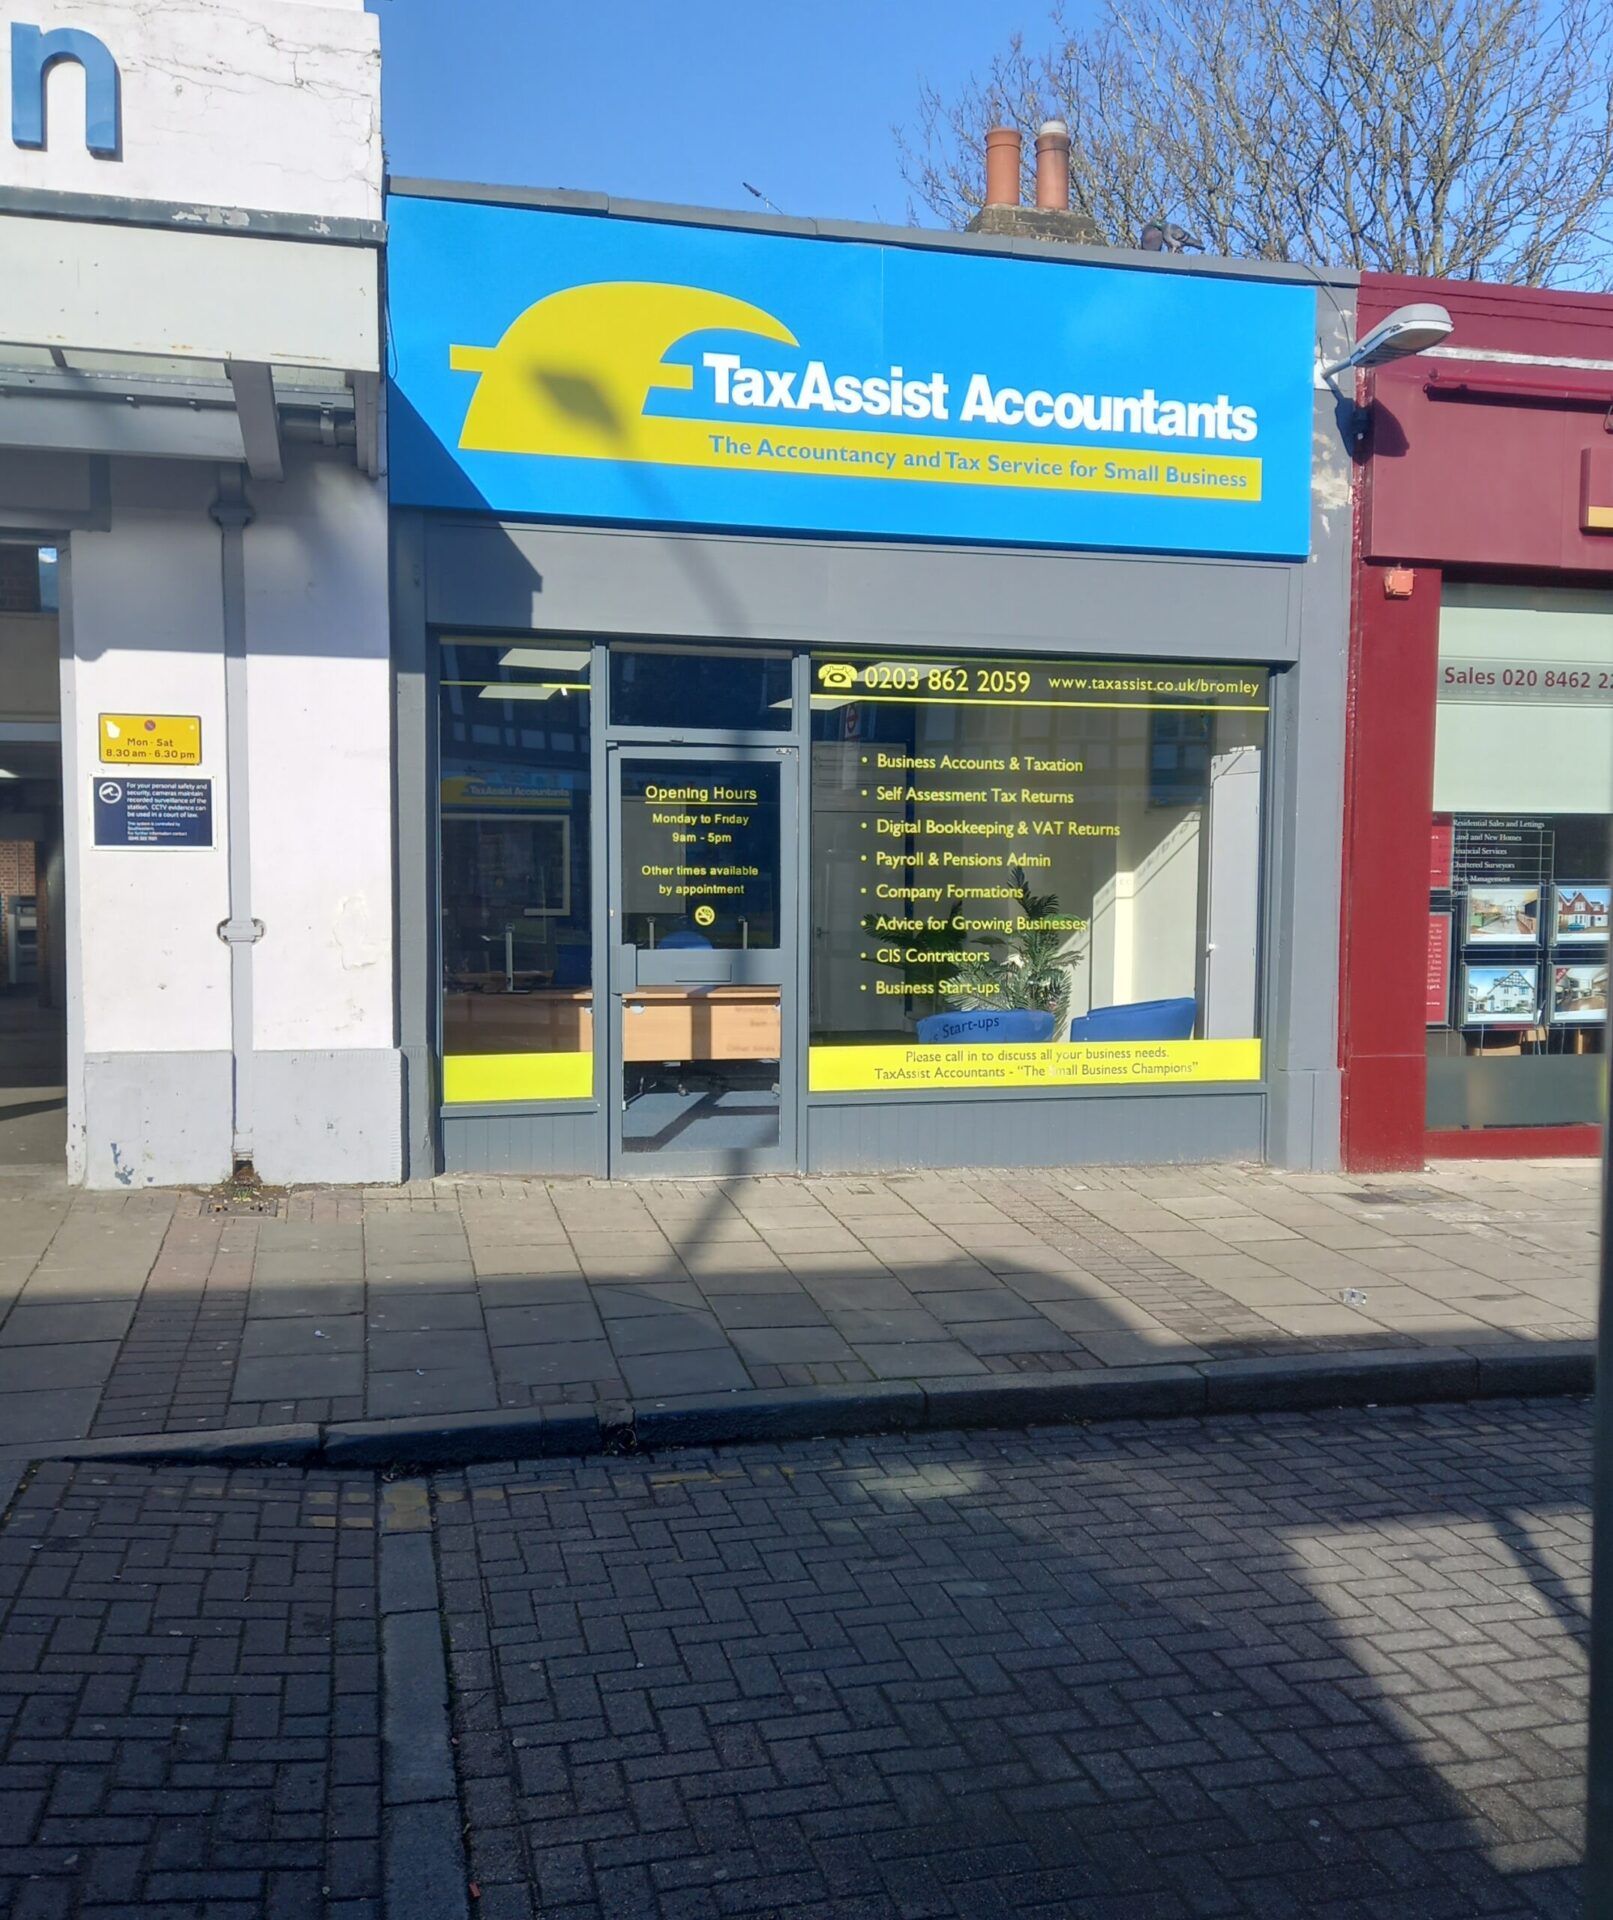 New TaxAssist Accountants shop opens in Bromley